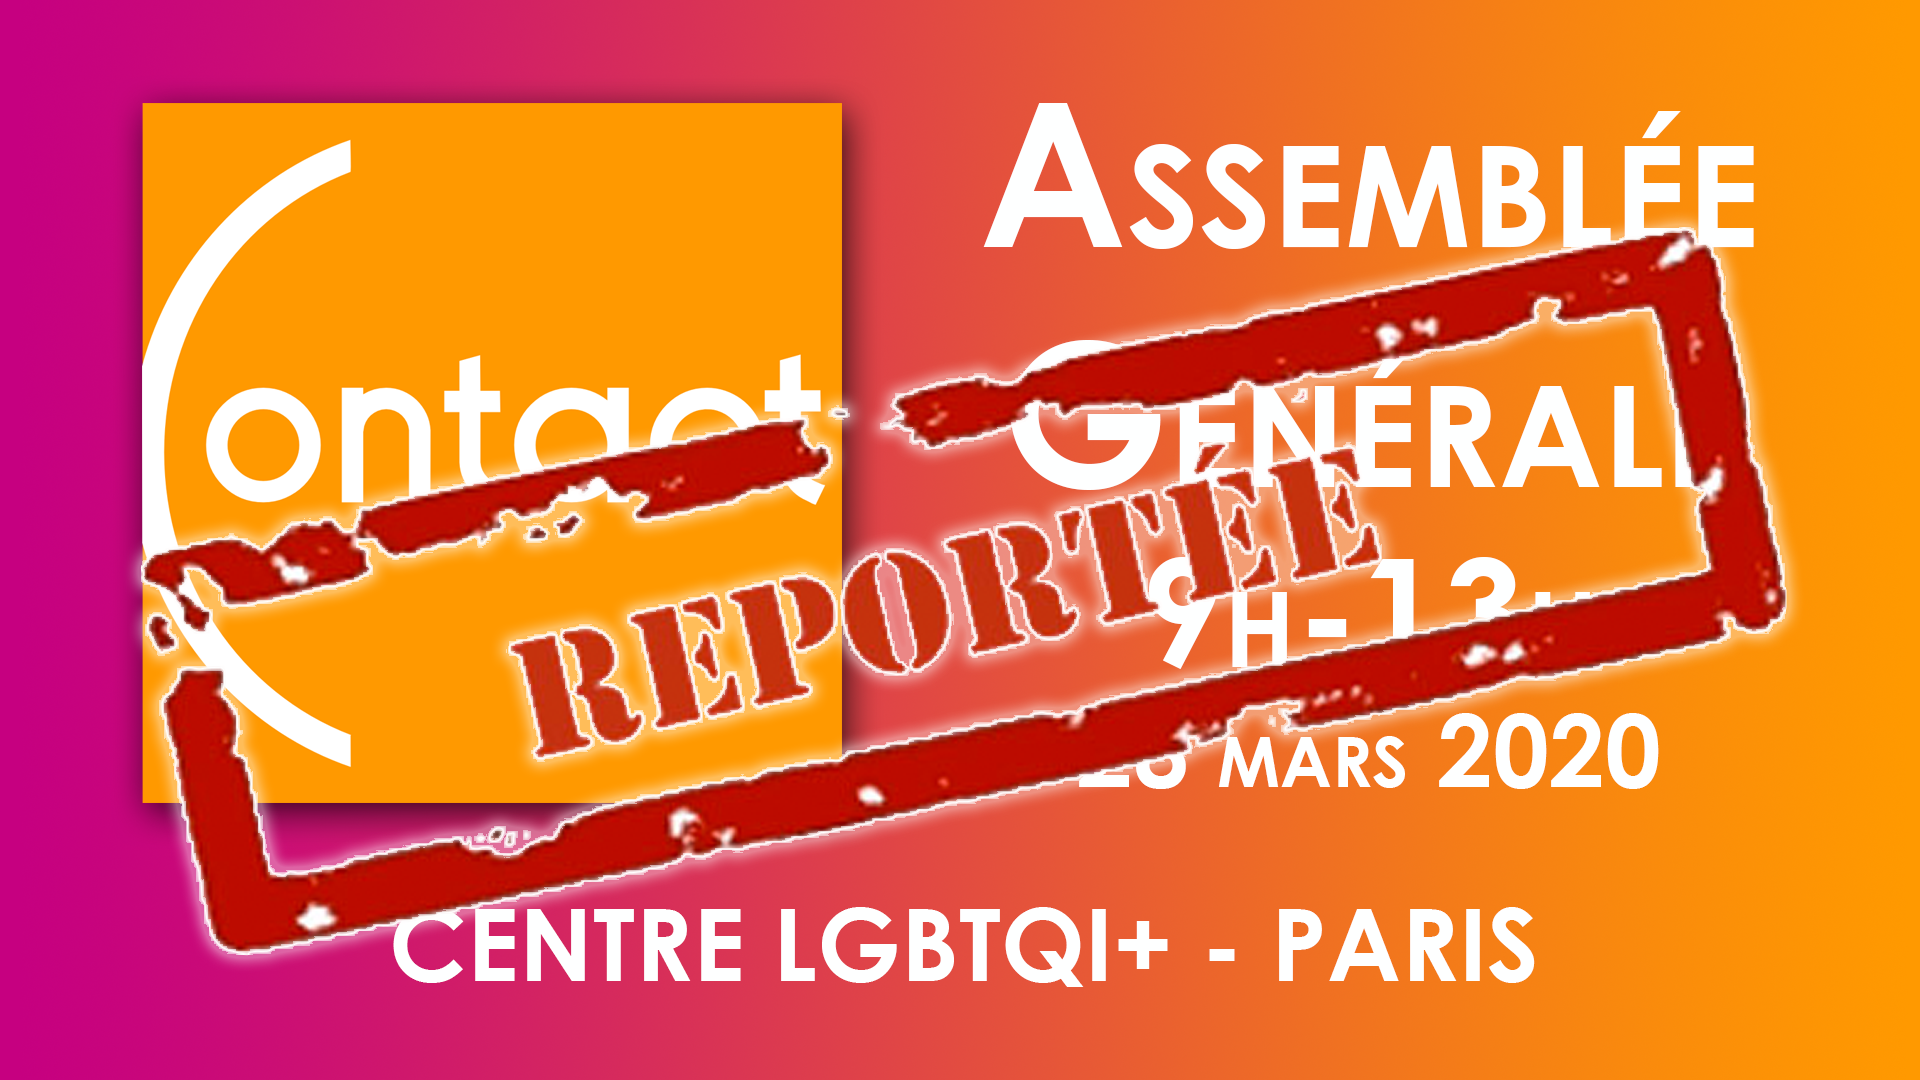 event-facebook-1920-1080-ag-contactfr-reportee.png